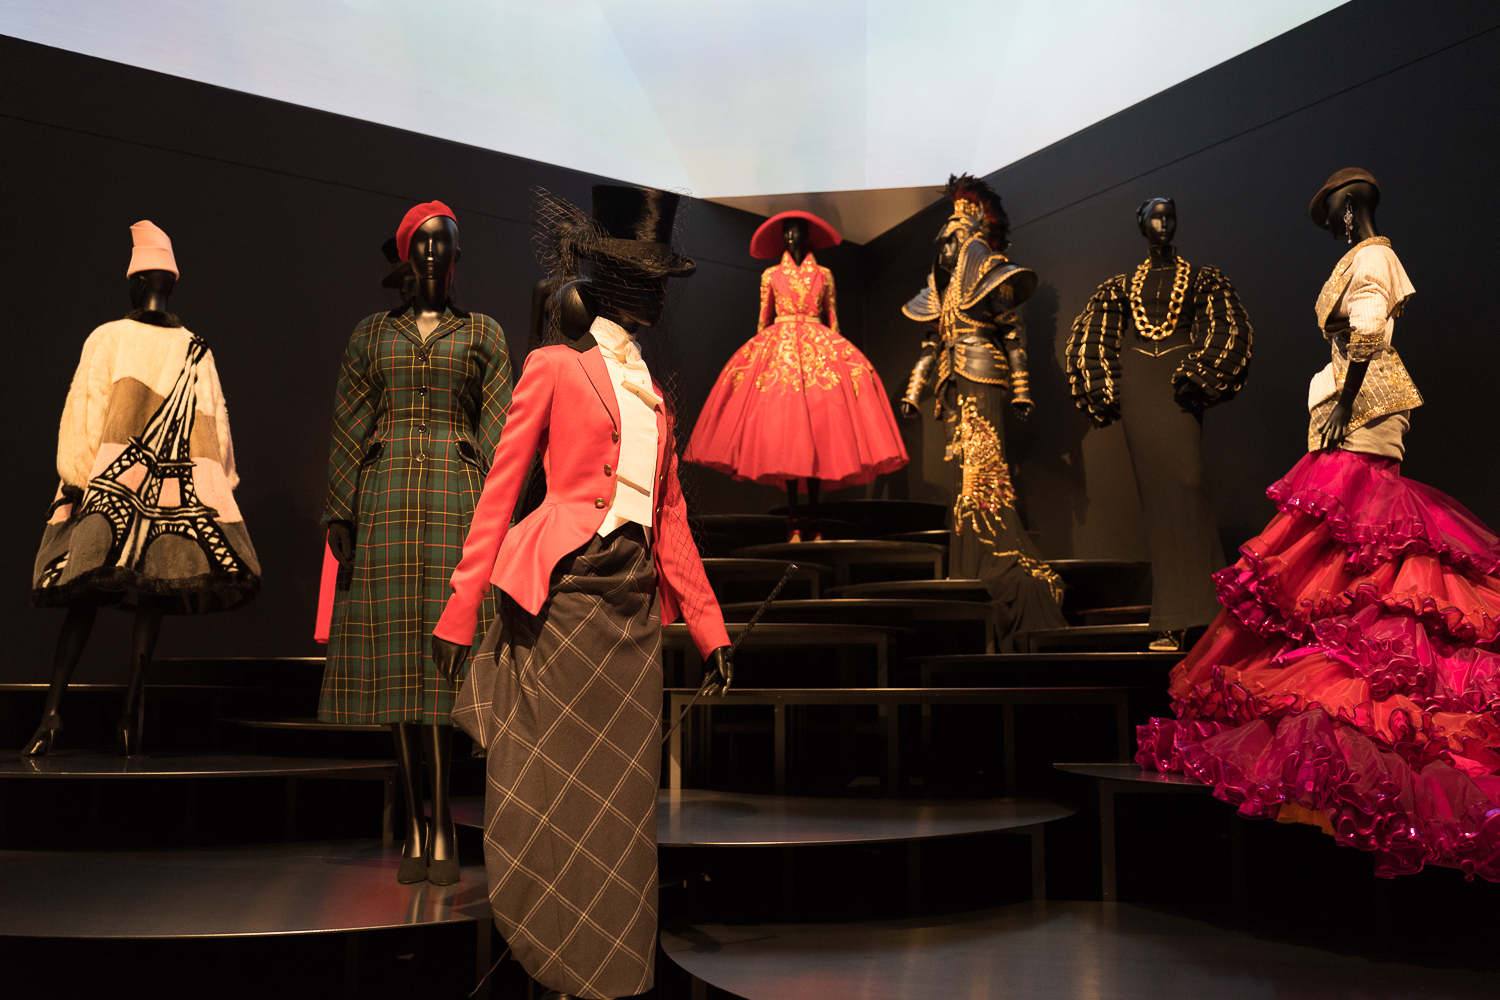 Dior: From Paris To The World Fashion Exhibit Is Breathtaking